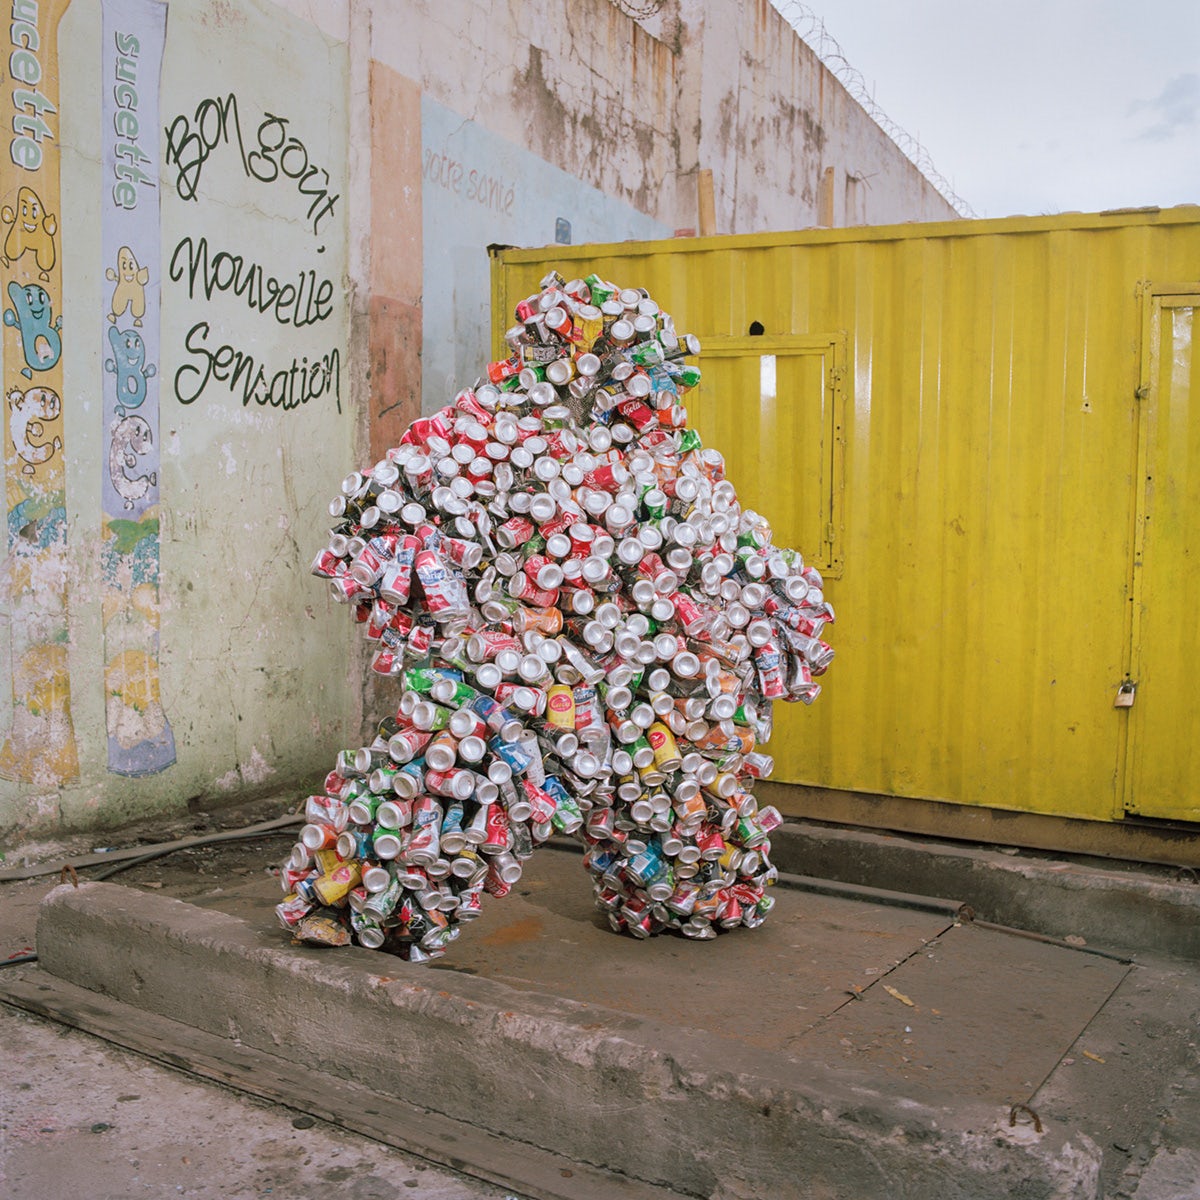 Photo by Colin Delfosse showing a person wearing a bubbly costume made from drinks cans, stood in front of a yellow metal clad container building